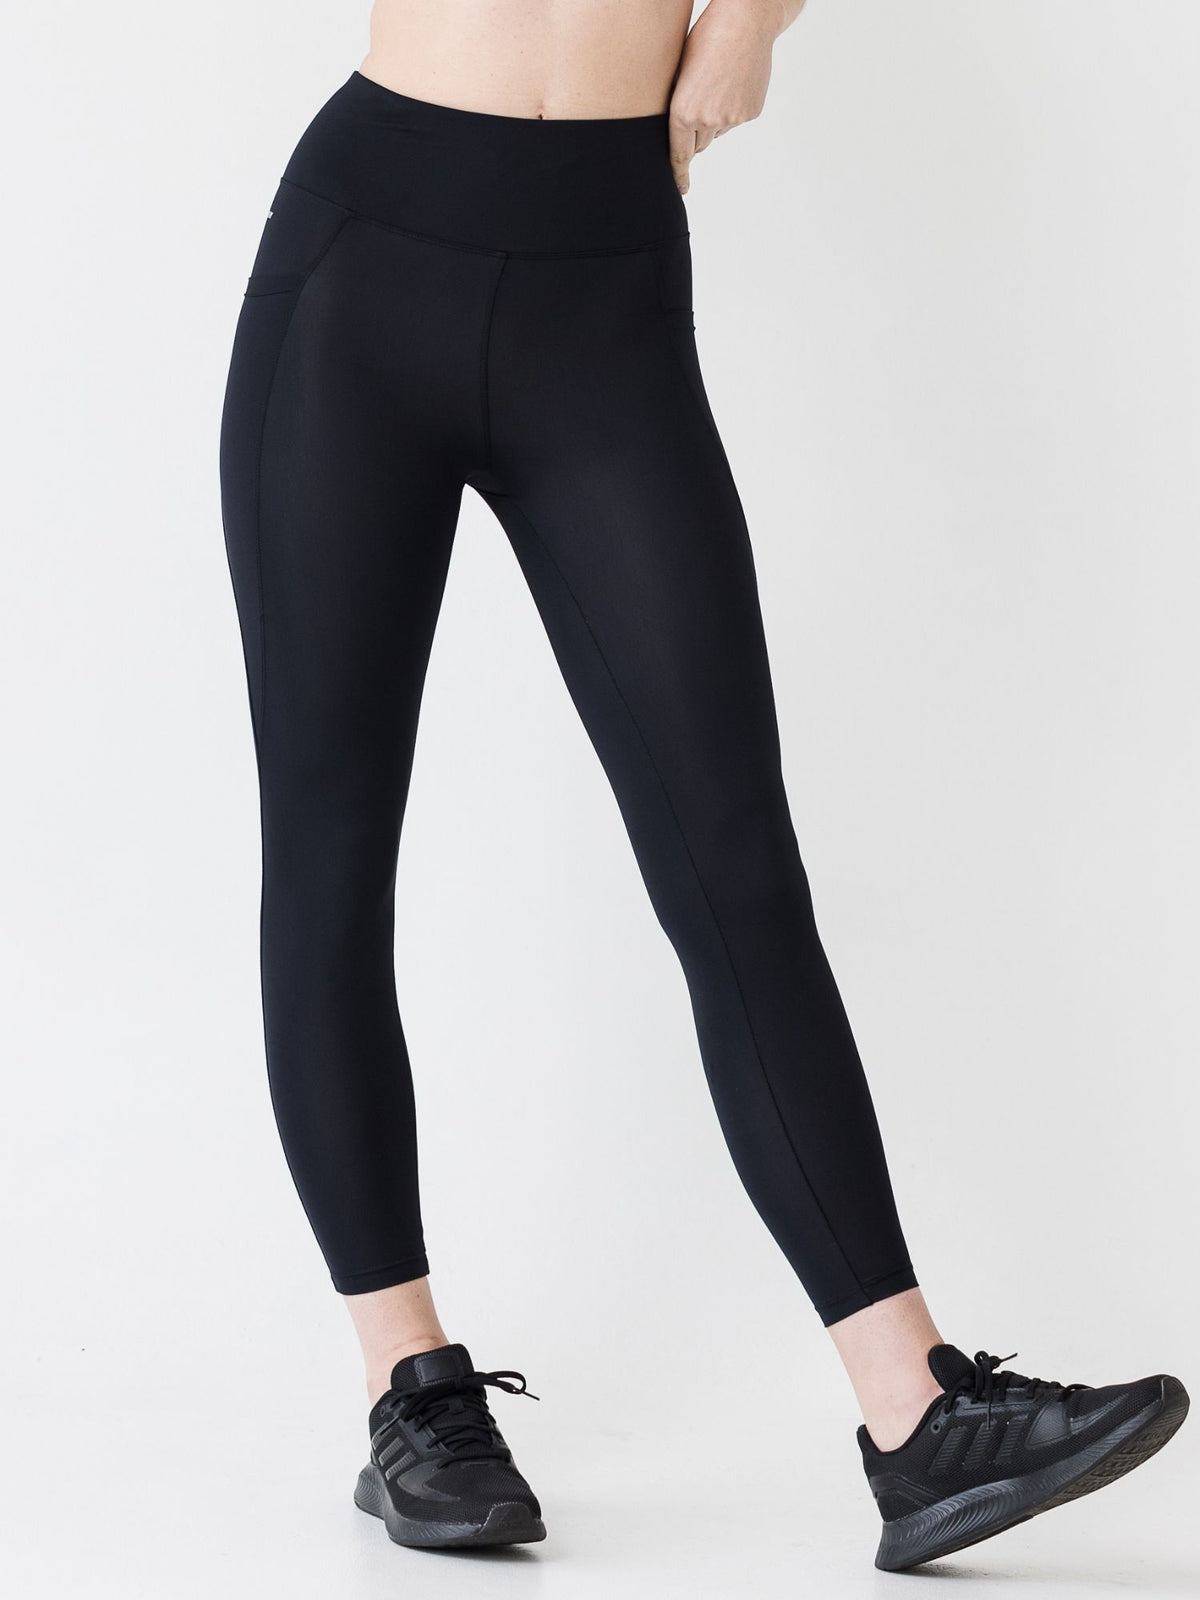 black long workout legging with pockets on both sides and at the back. 